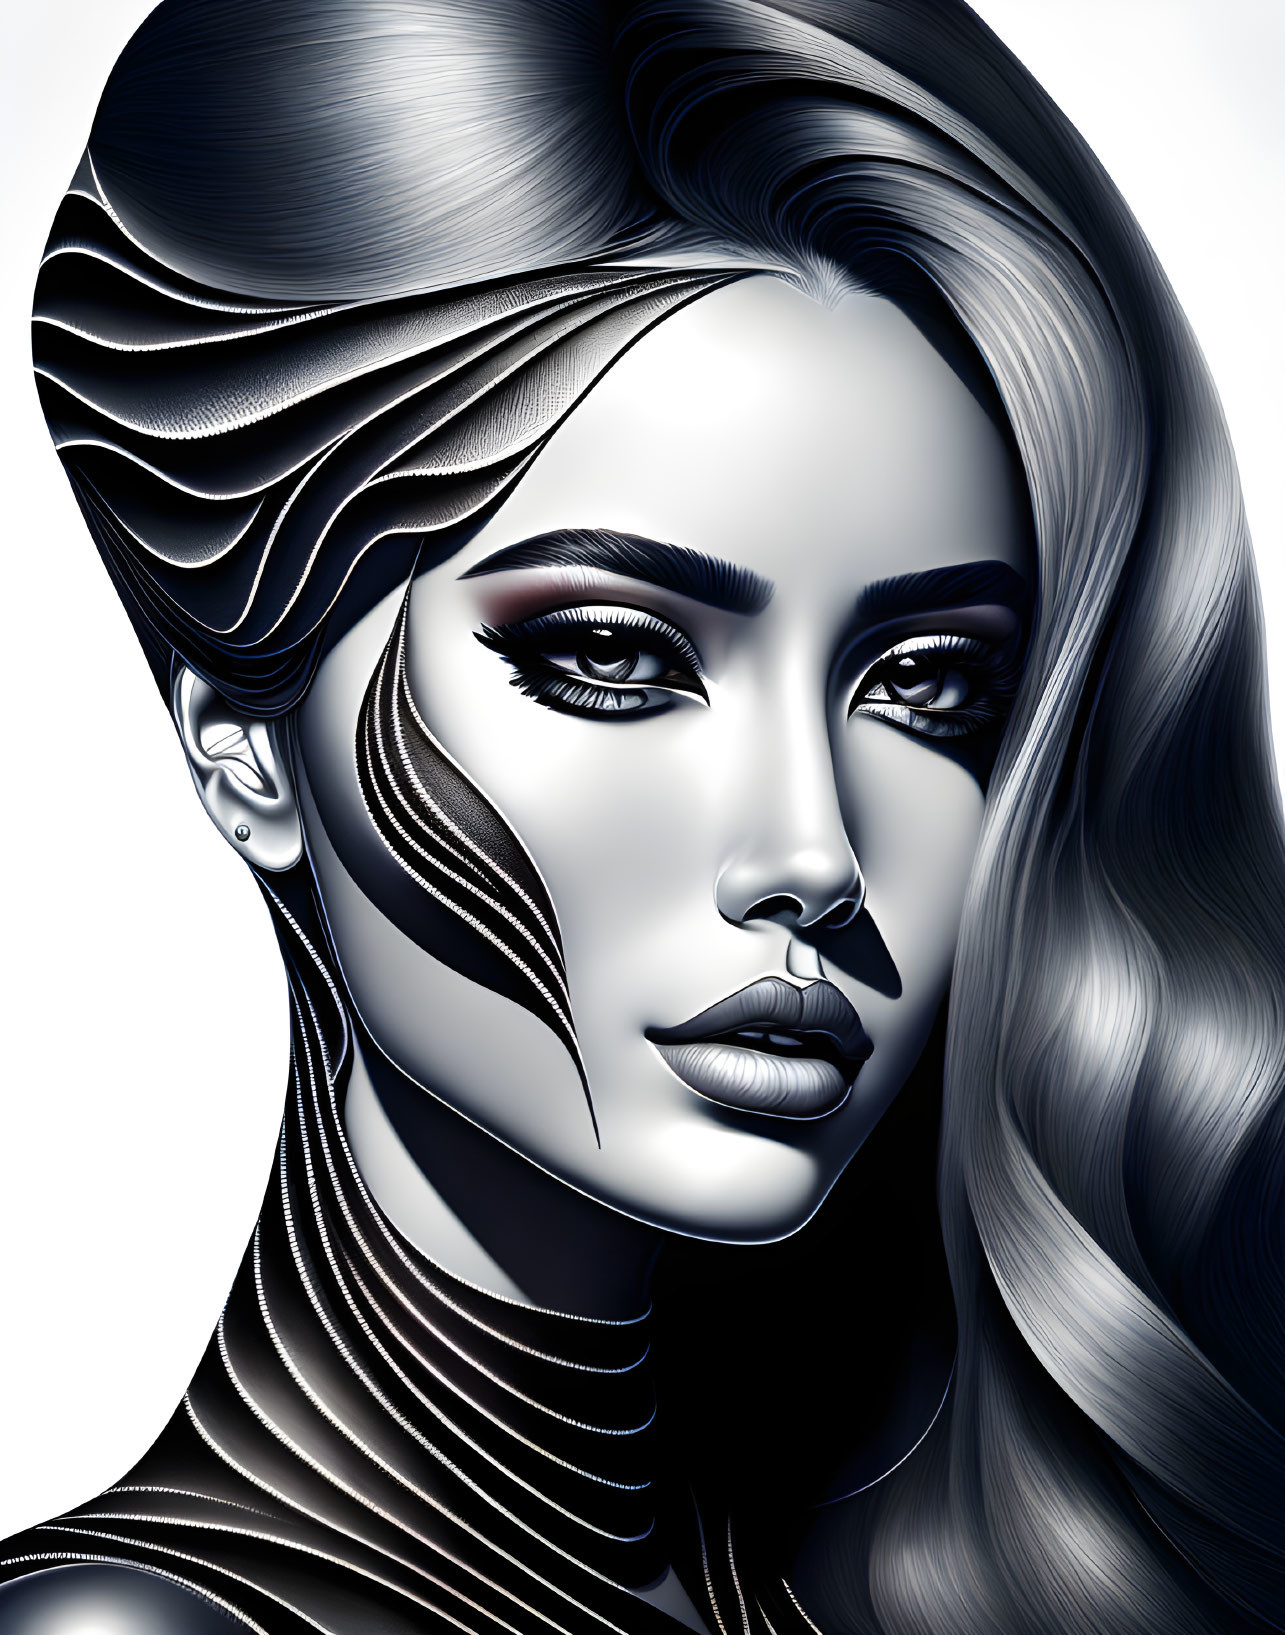 Monochromatic digital artwork: Woman with flowing hair and shadowed facial features.